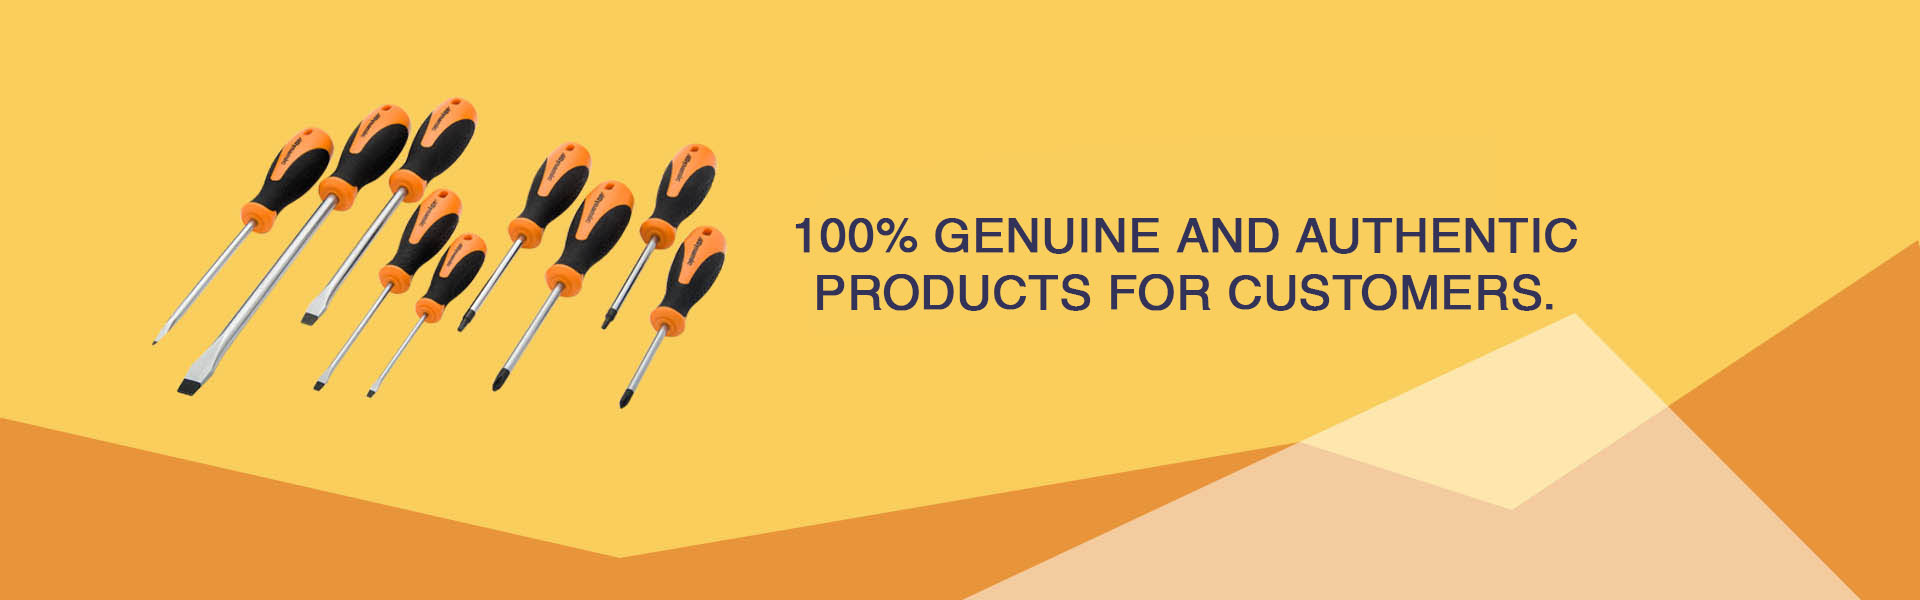 100% Genuine and Authentic Products for customers